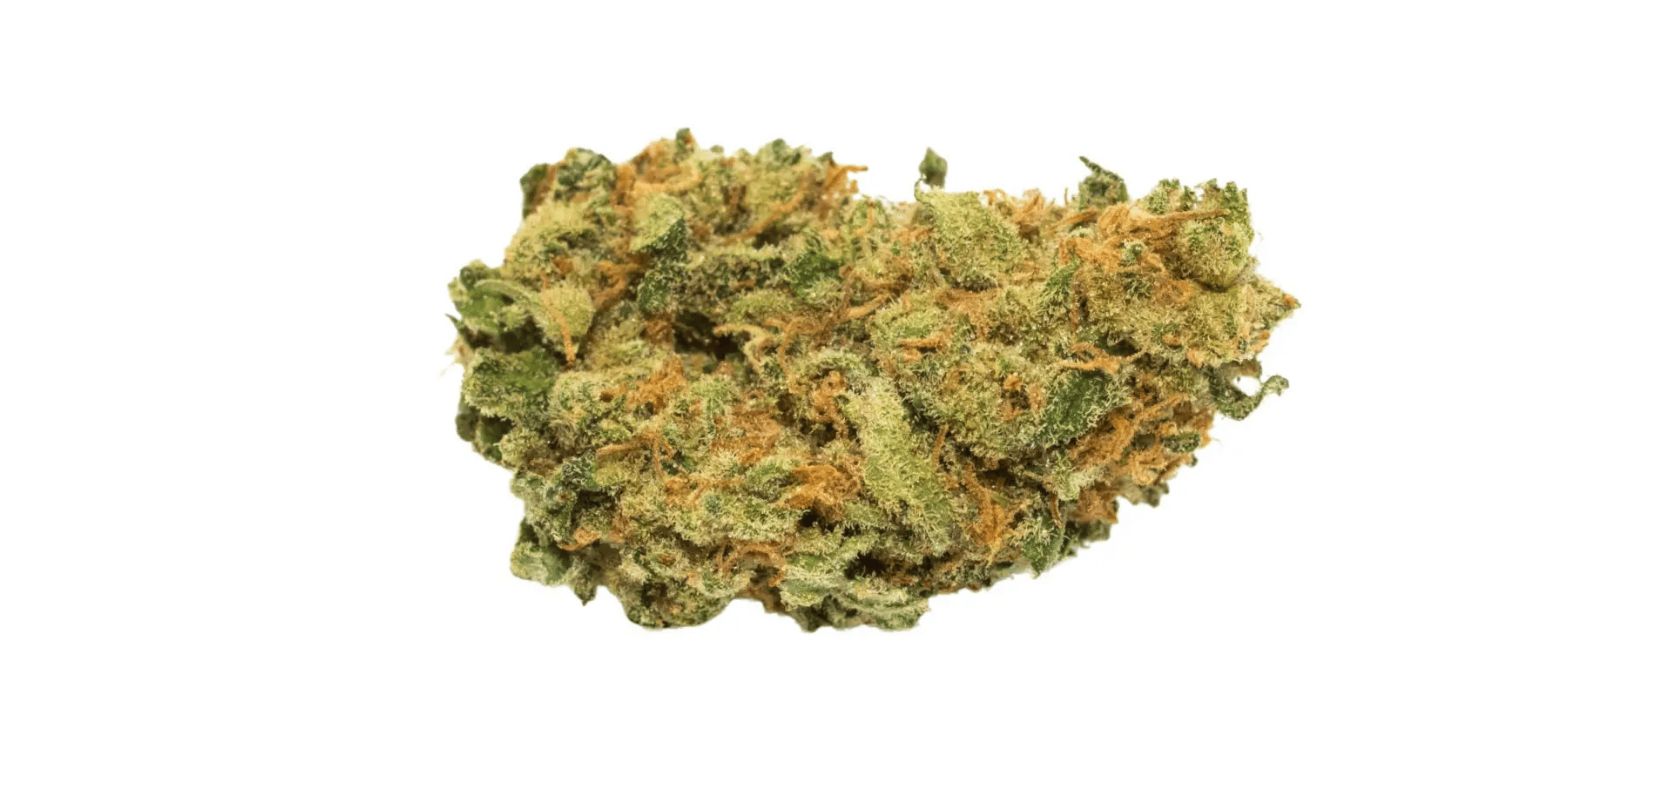 As mentioned before in the Amnesia Haze review, this Sativa is one of Canada's most potent weed strains. 